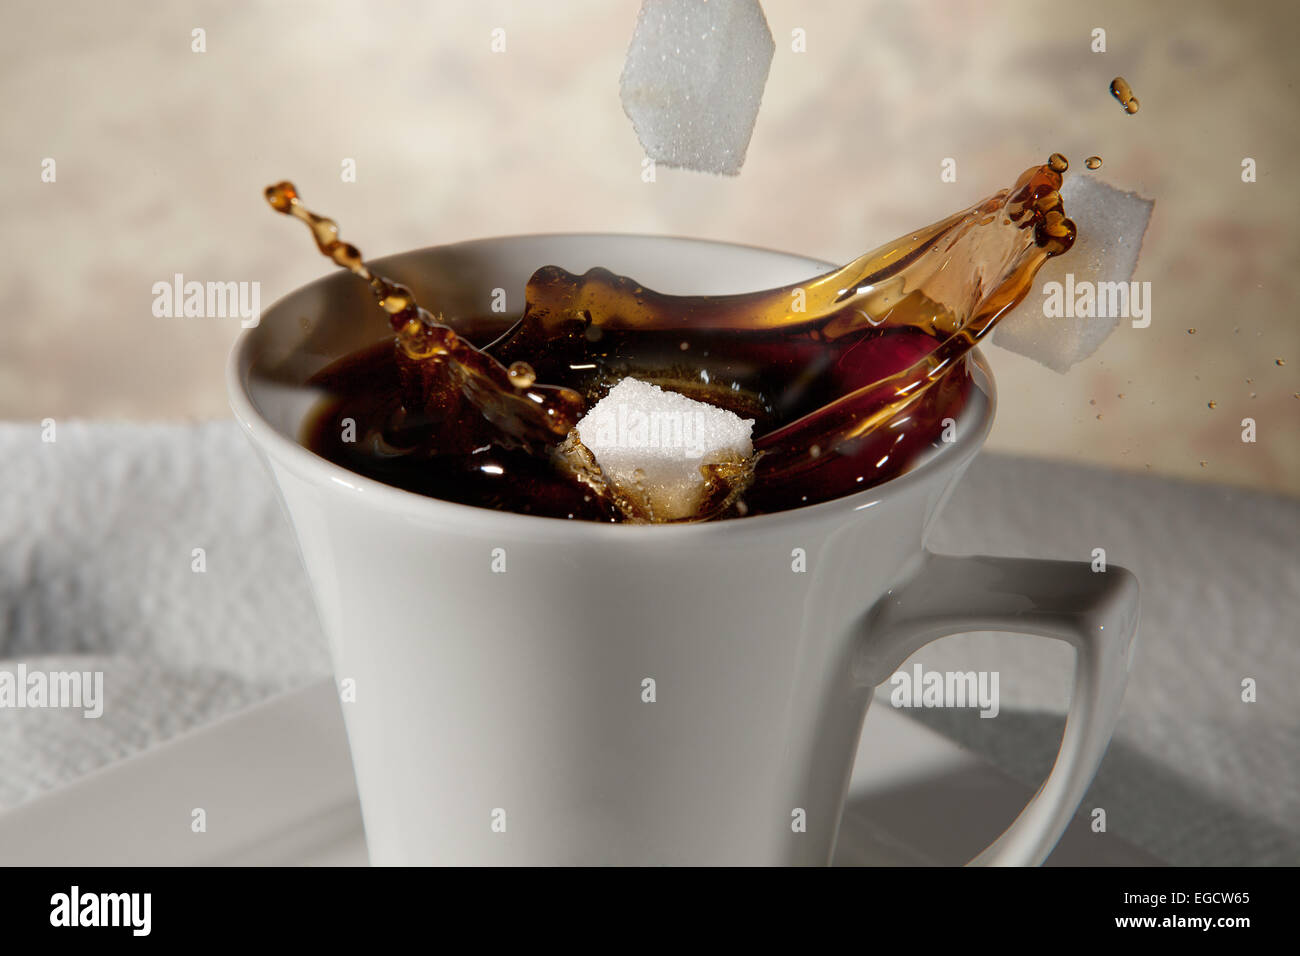 Sugar cubes falling into a cup of coffee, splashing coffee Stock Photo